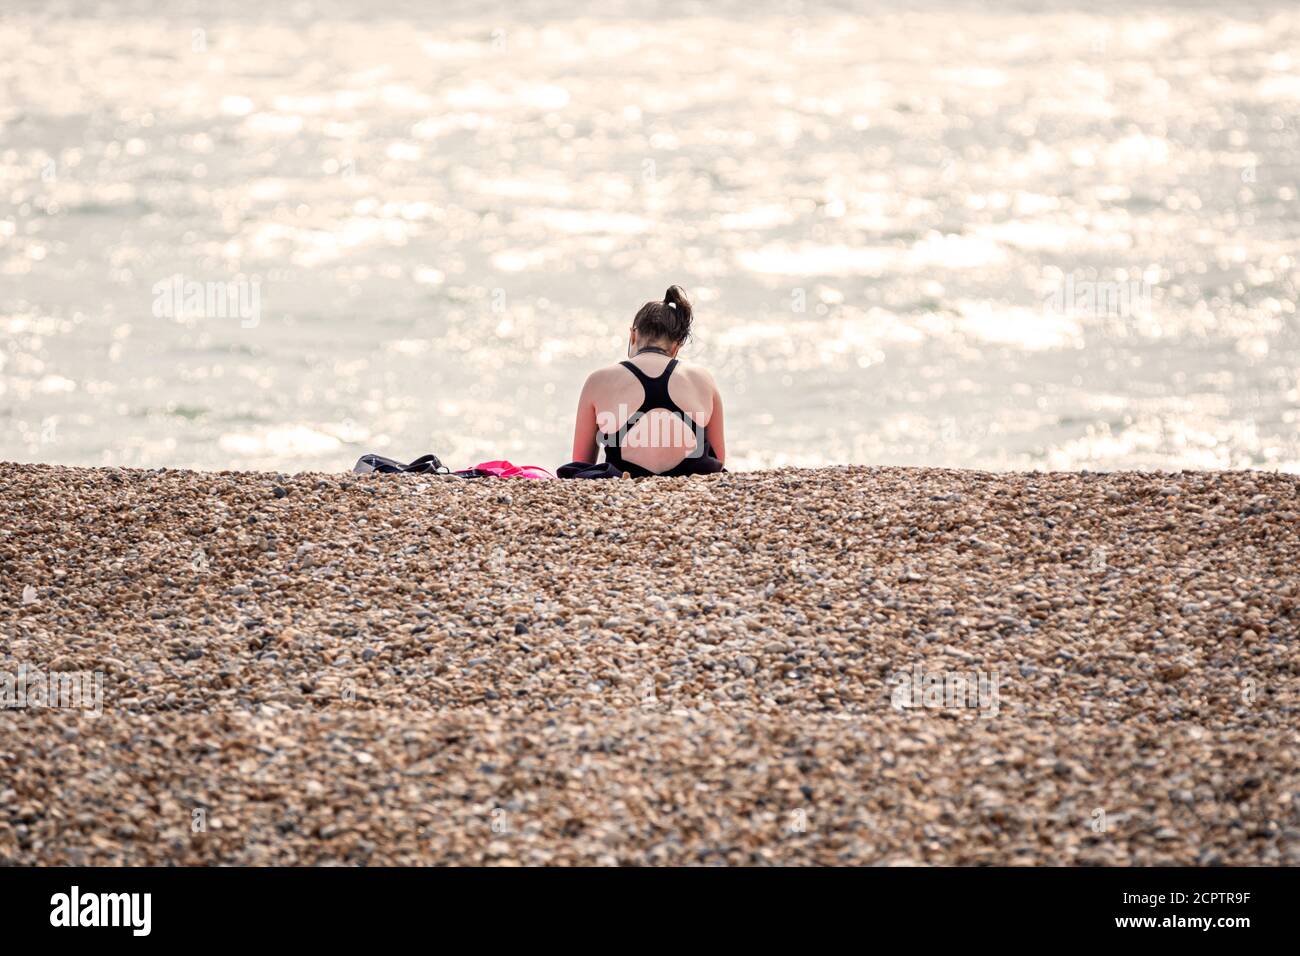 A woman sitting alone on a beach during covid-19 restrictions Stock Photo